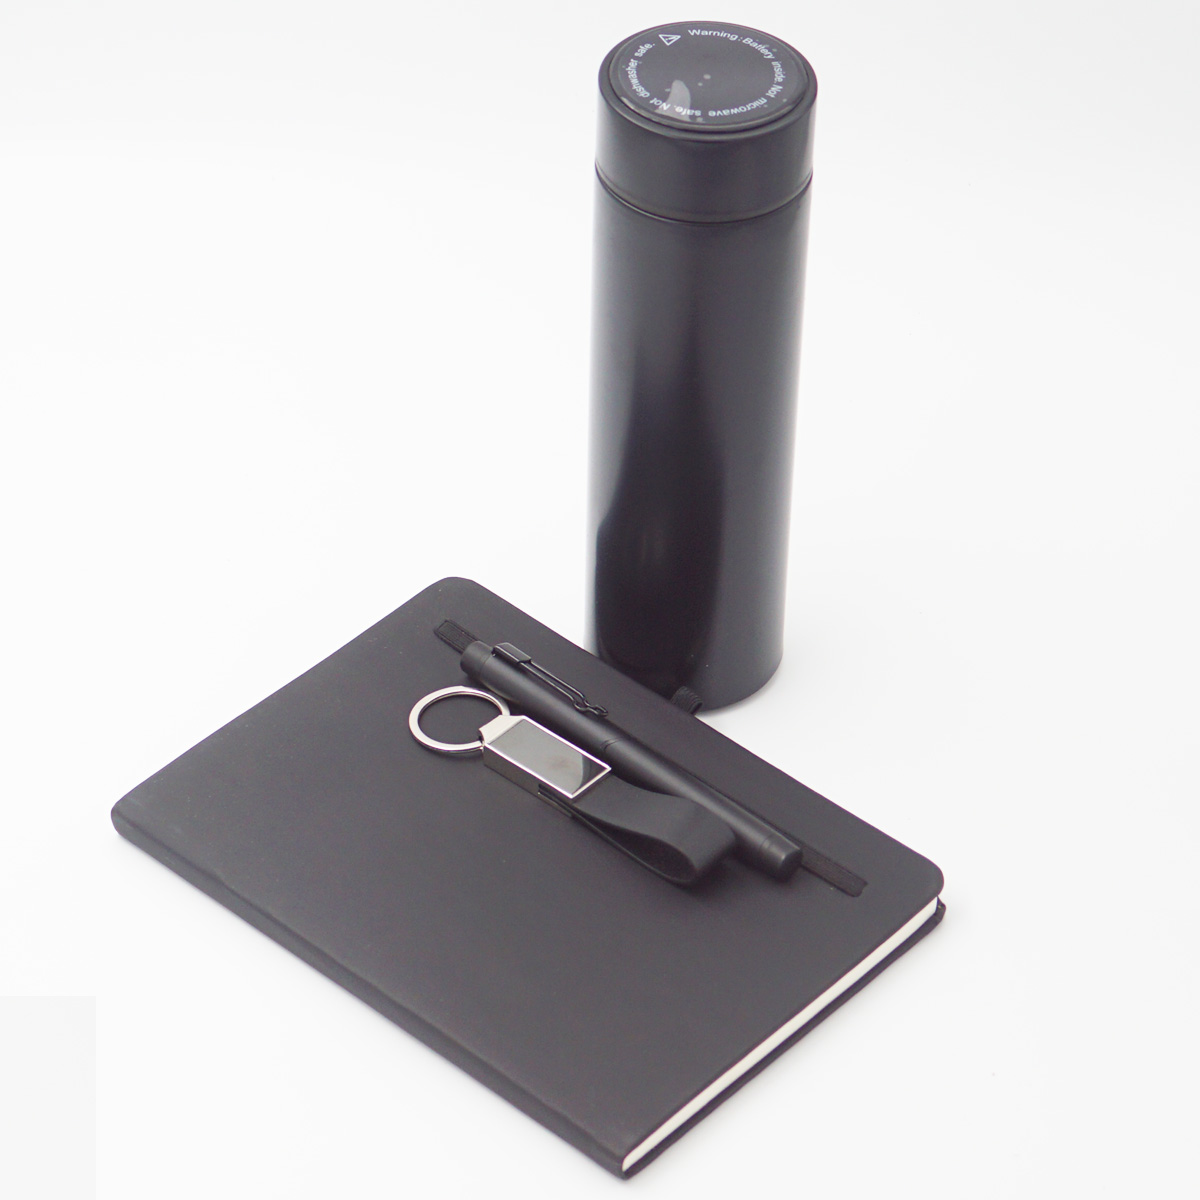 penhouse.in Black Color A5 Dairy  With 500ml Black Color Flask Leather Keychain With Black Cap Type Roller Ball Pen 4 in 1 Set  SKU 23626